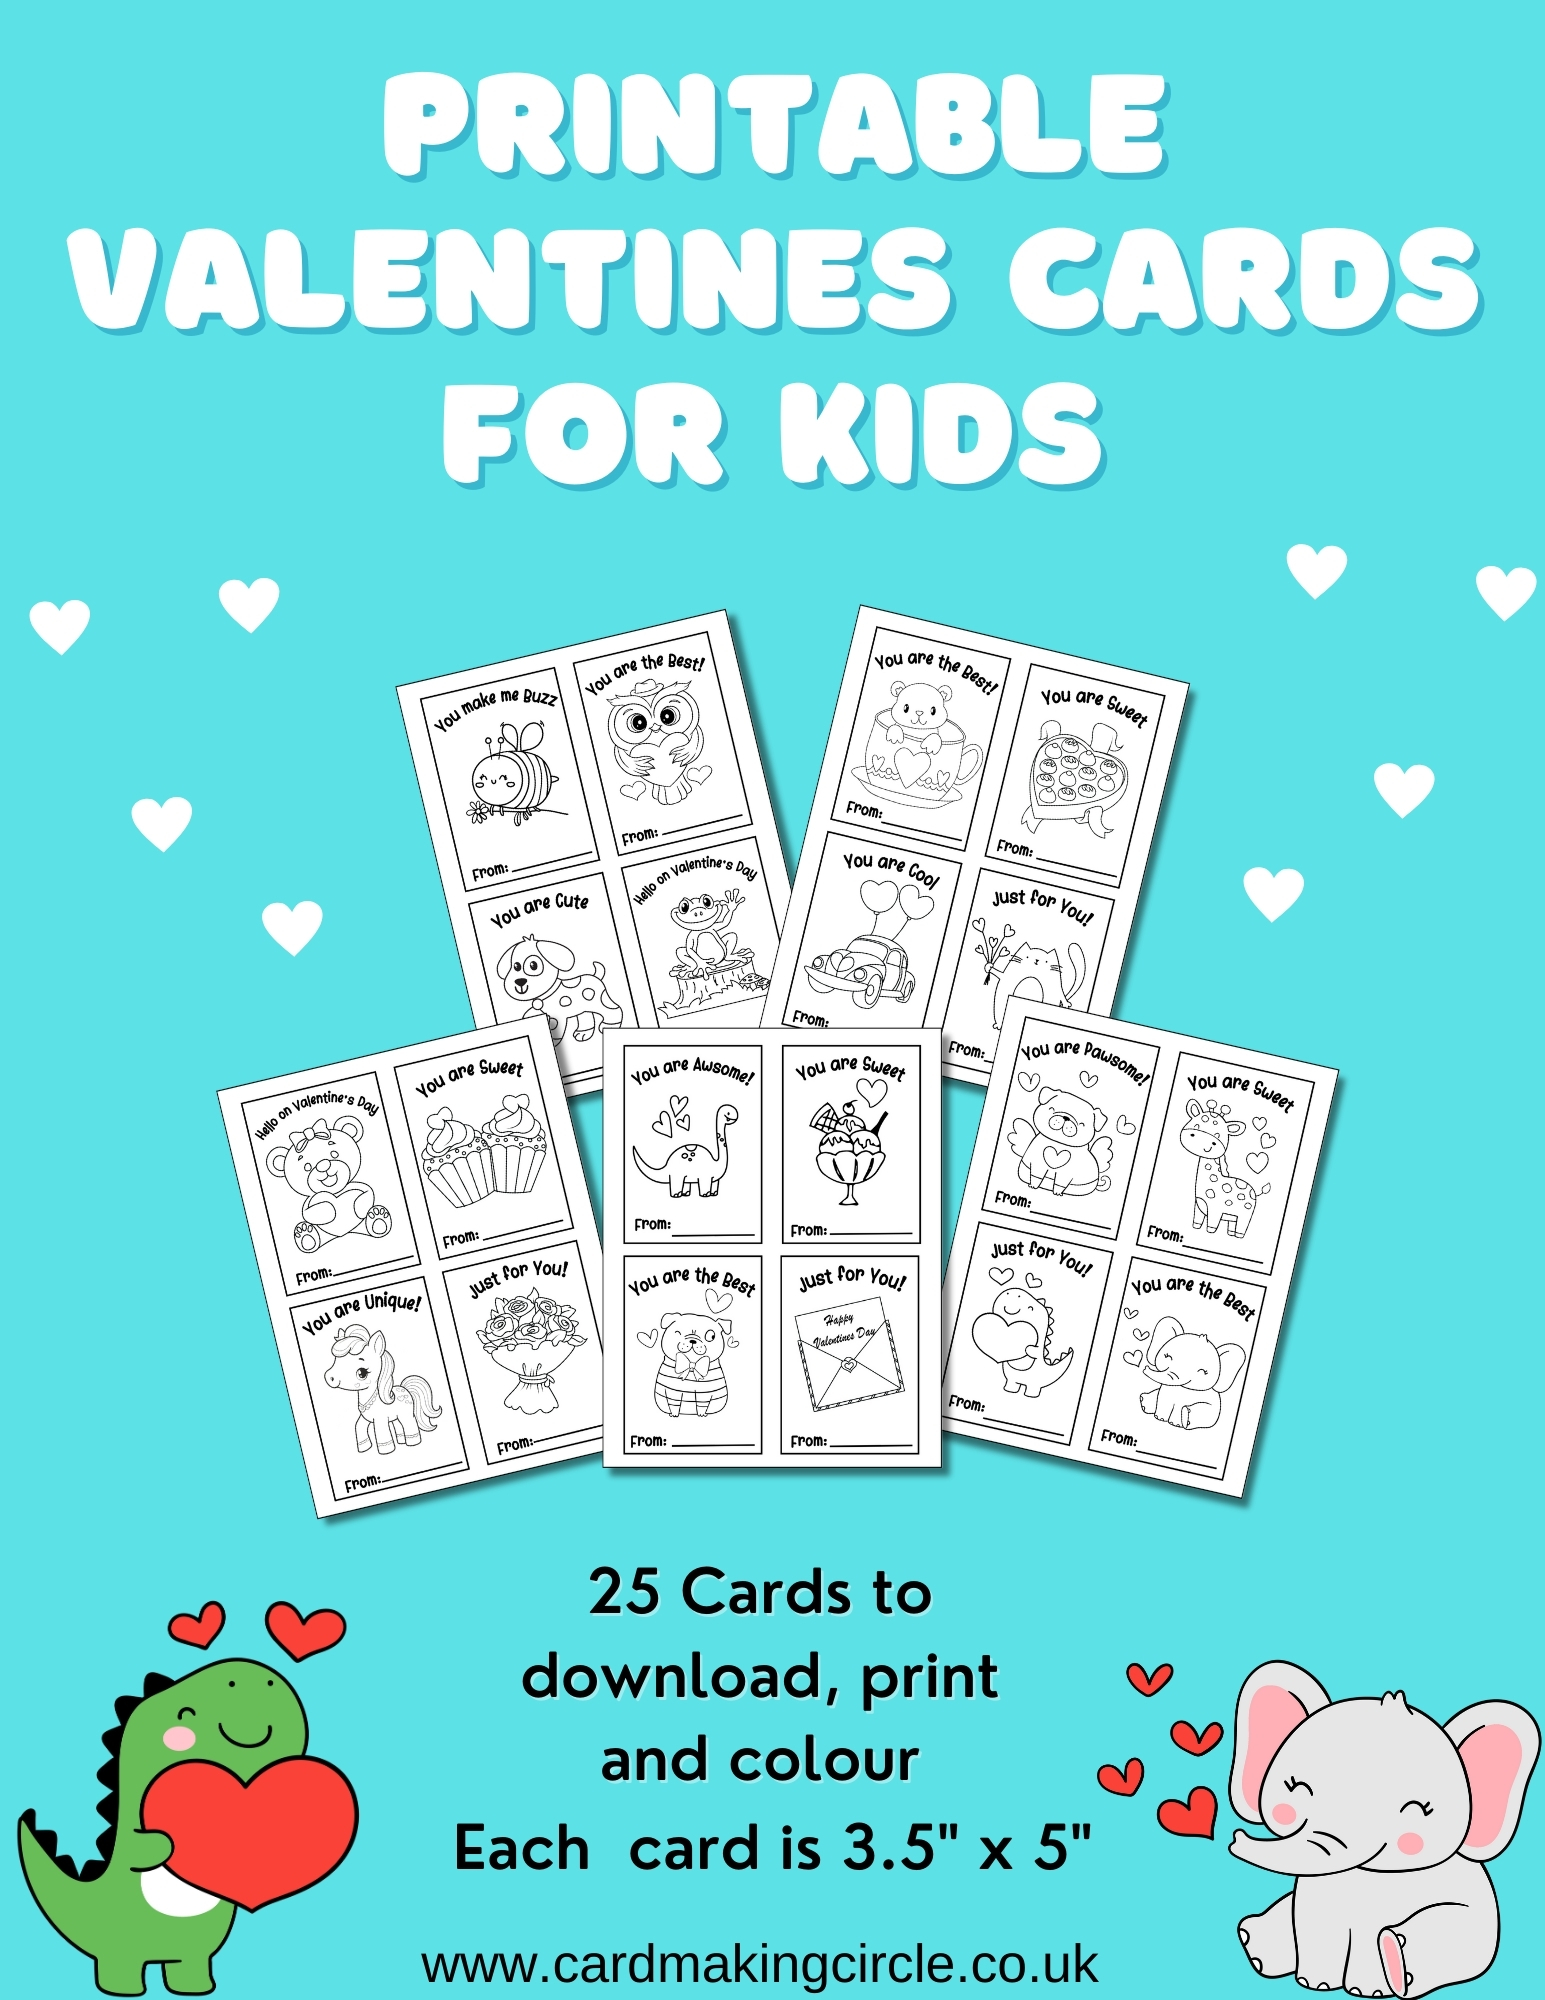 Looking for the perfect Valentine's cards for kids? Look no further! Perfect for school, a Valentine's party, or to give out to friends.